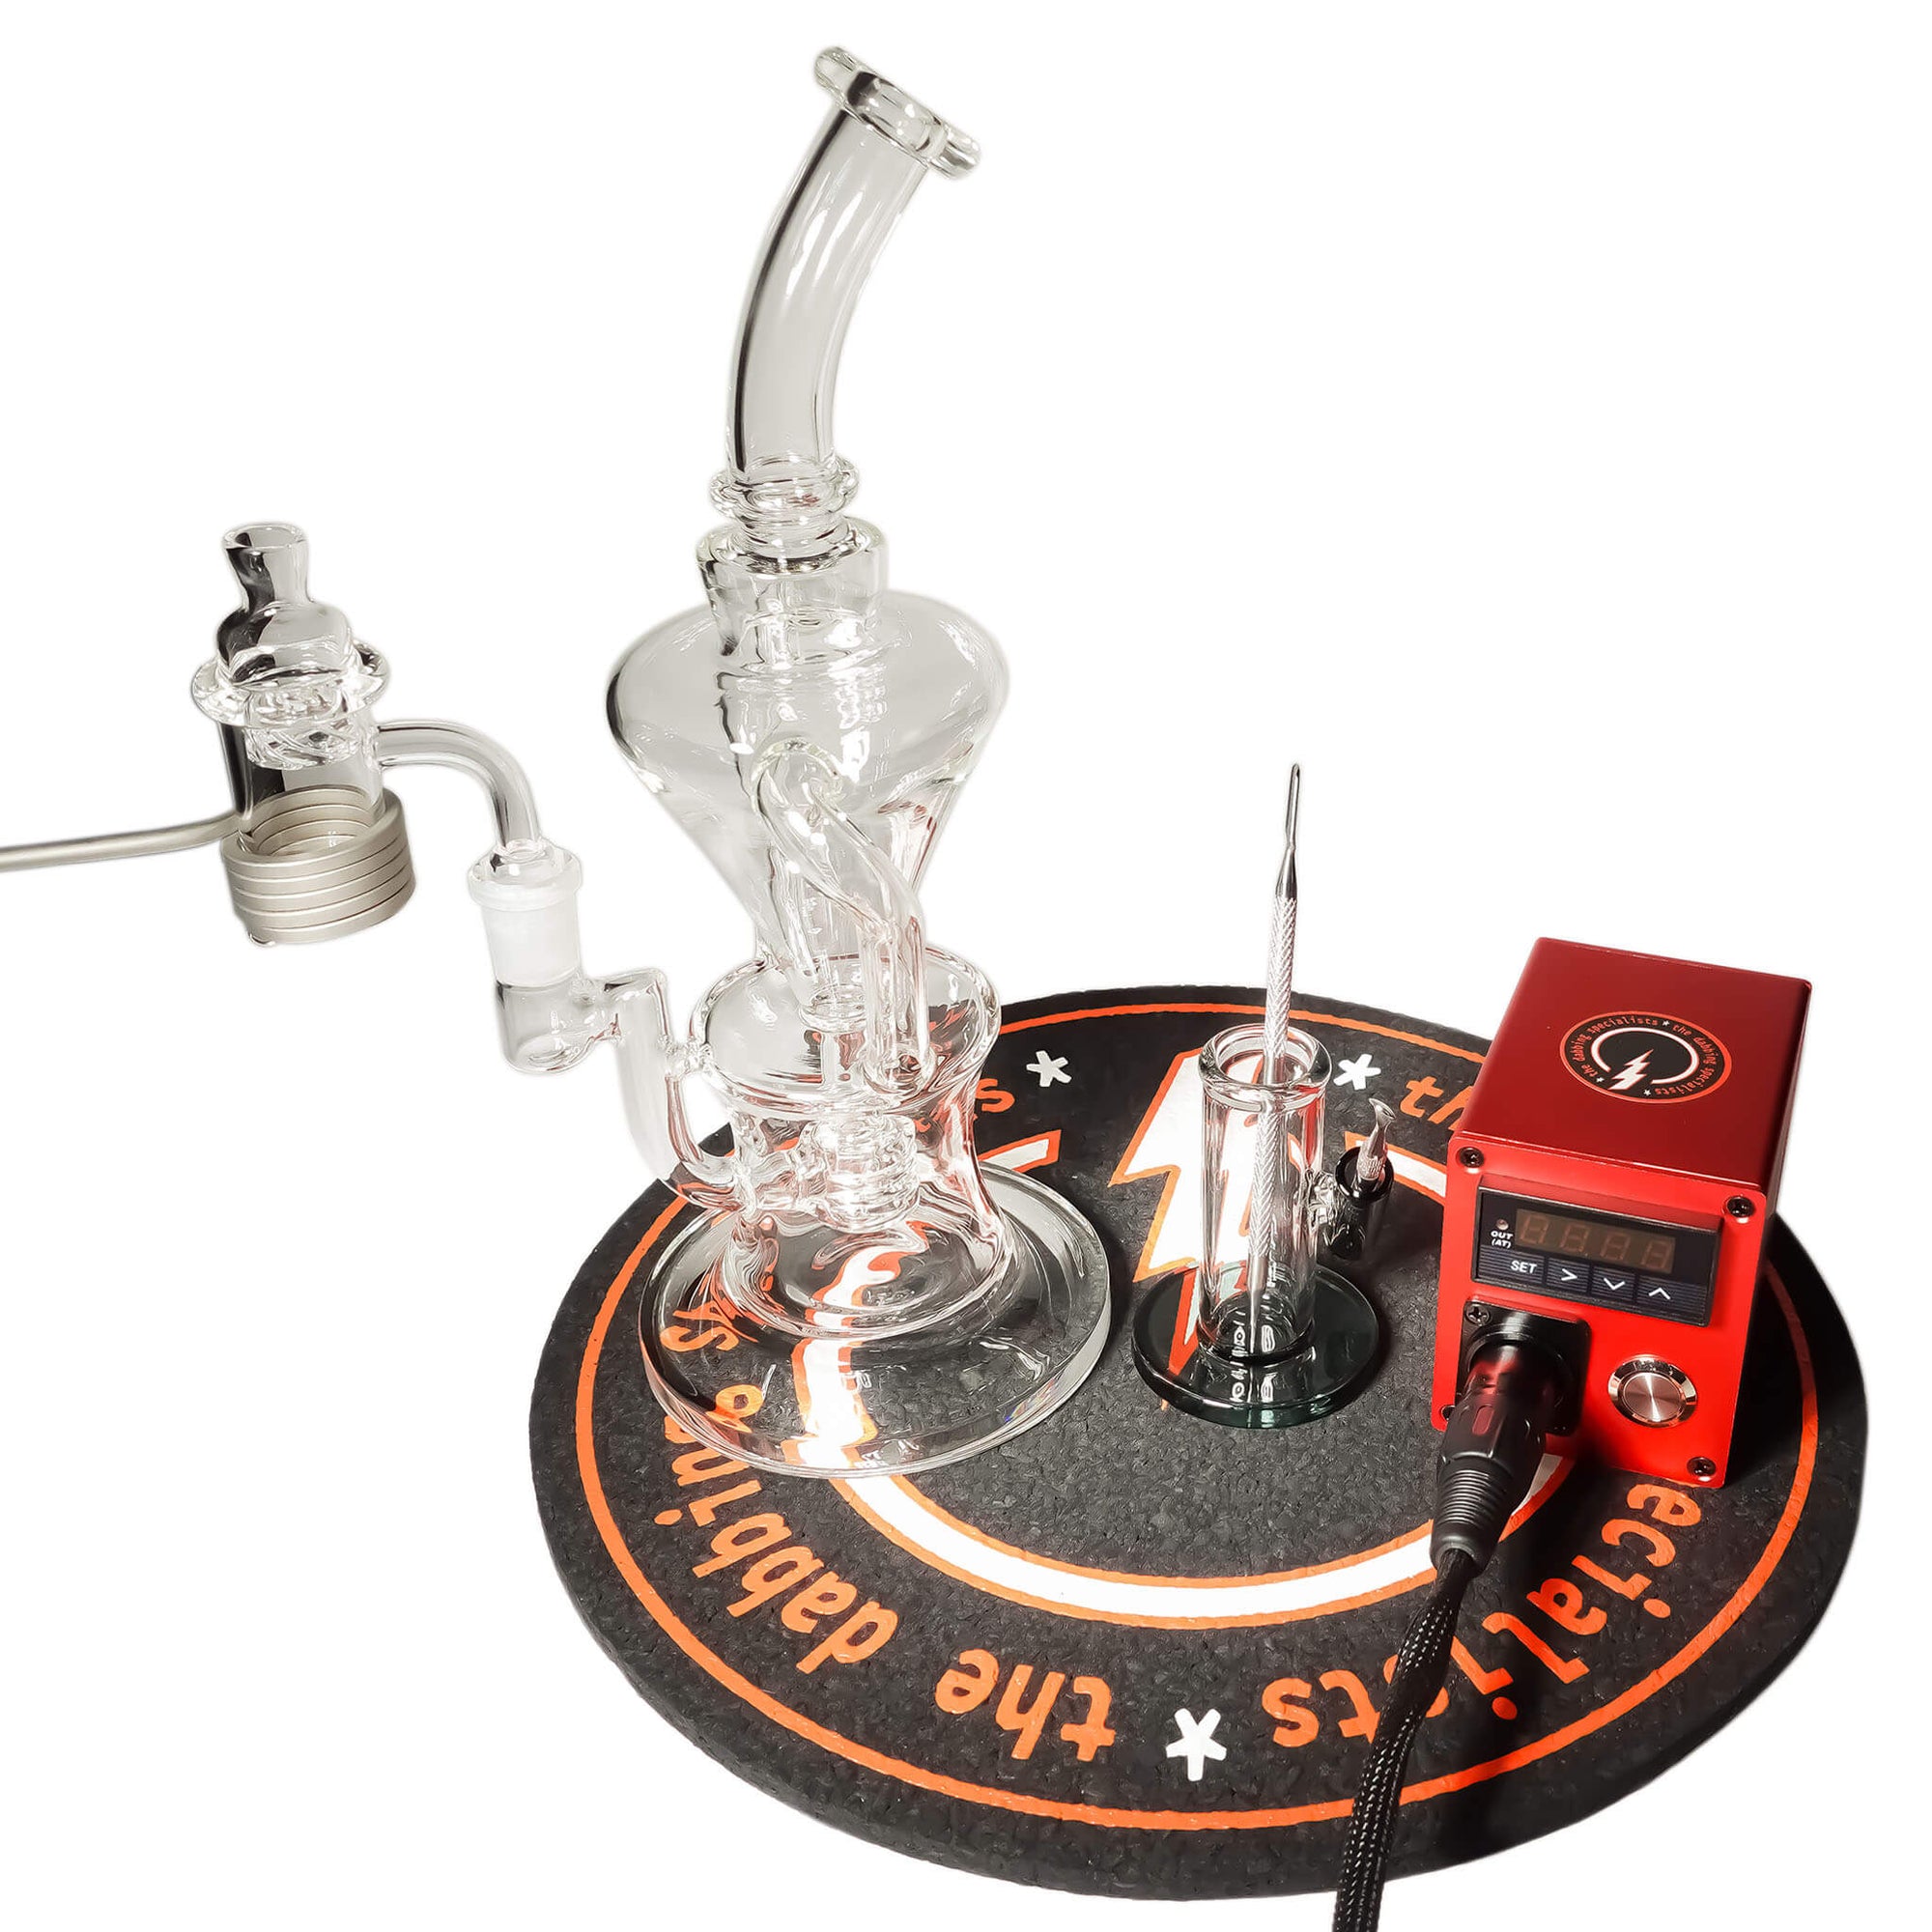 Futurus 25mm E-Banger Deluxe Enail Kit | Red Kit View | the dabbing specialists